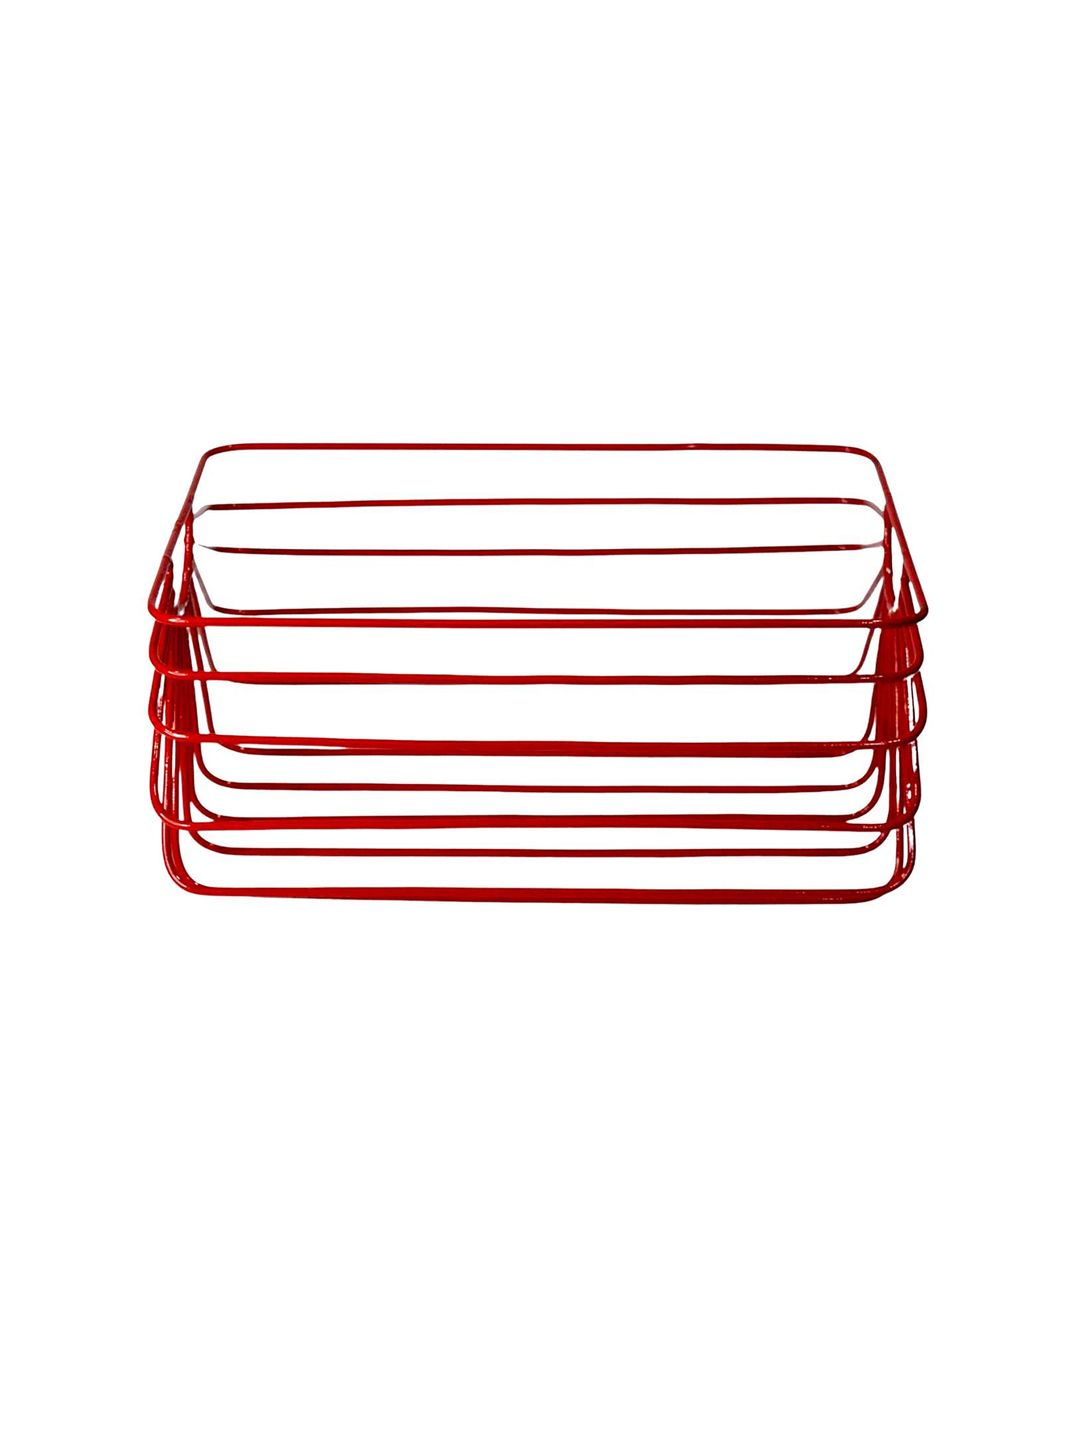 Tranquil square Red Solid Metal Fruit Basket Price in India